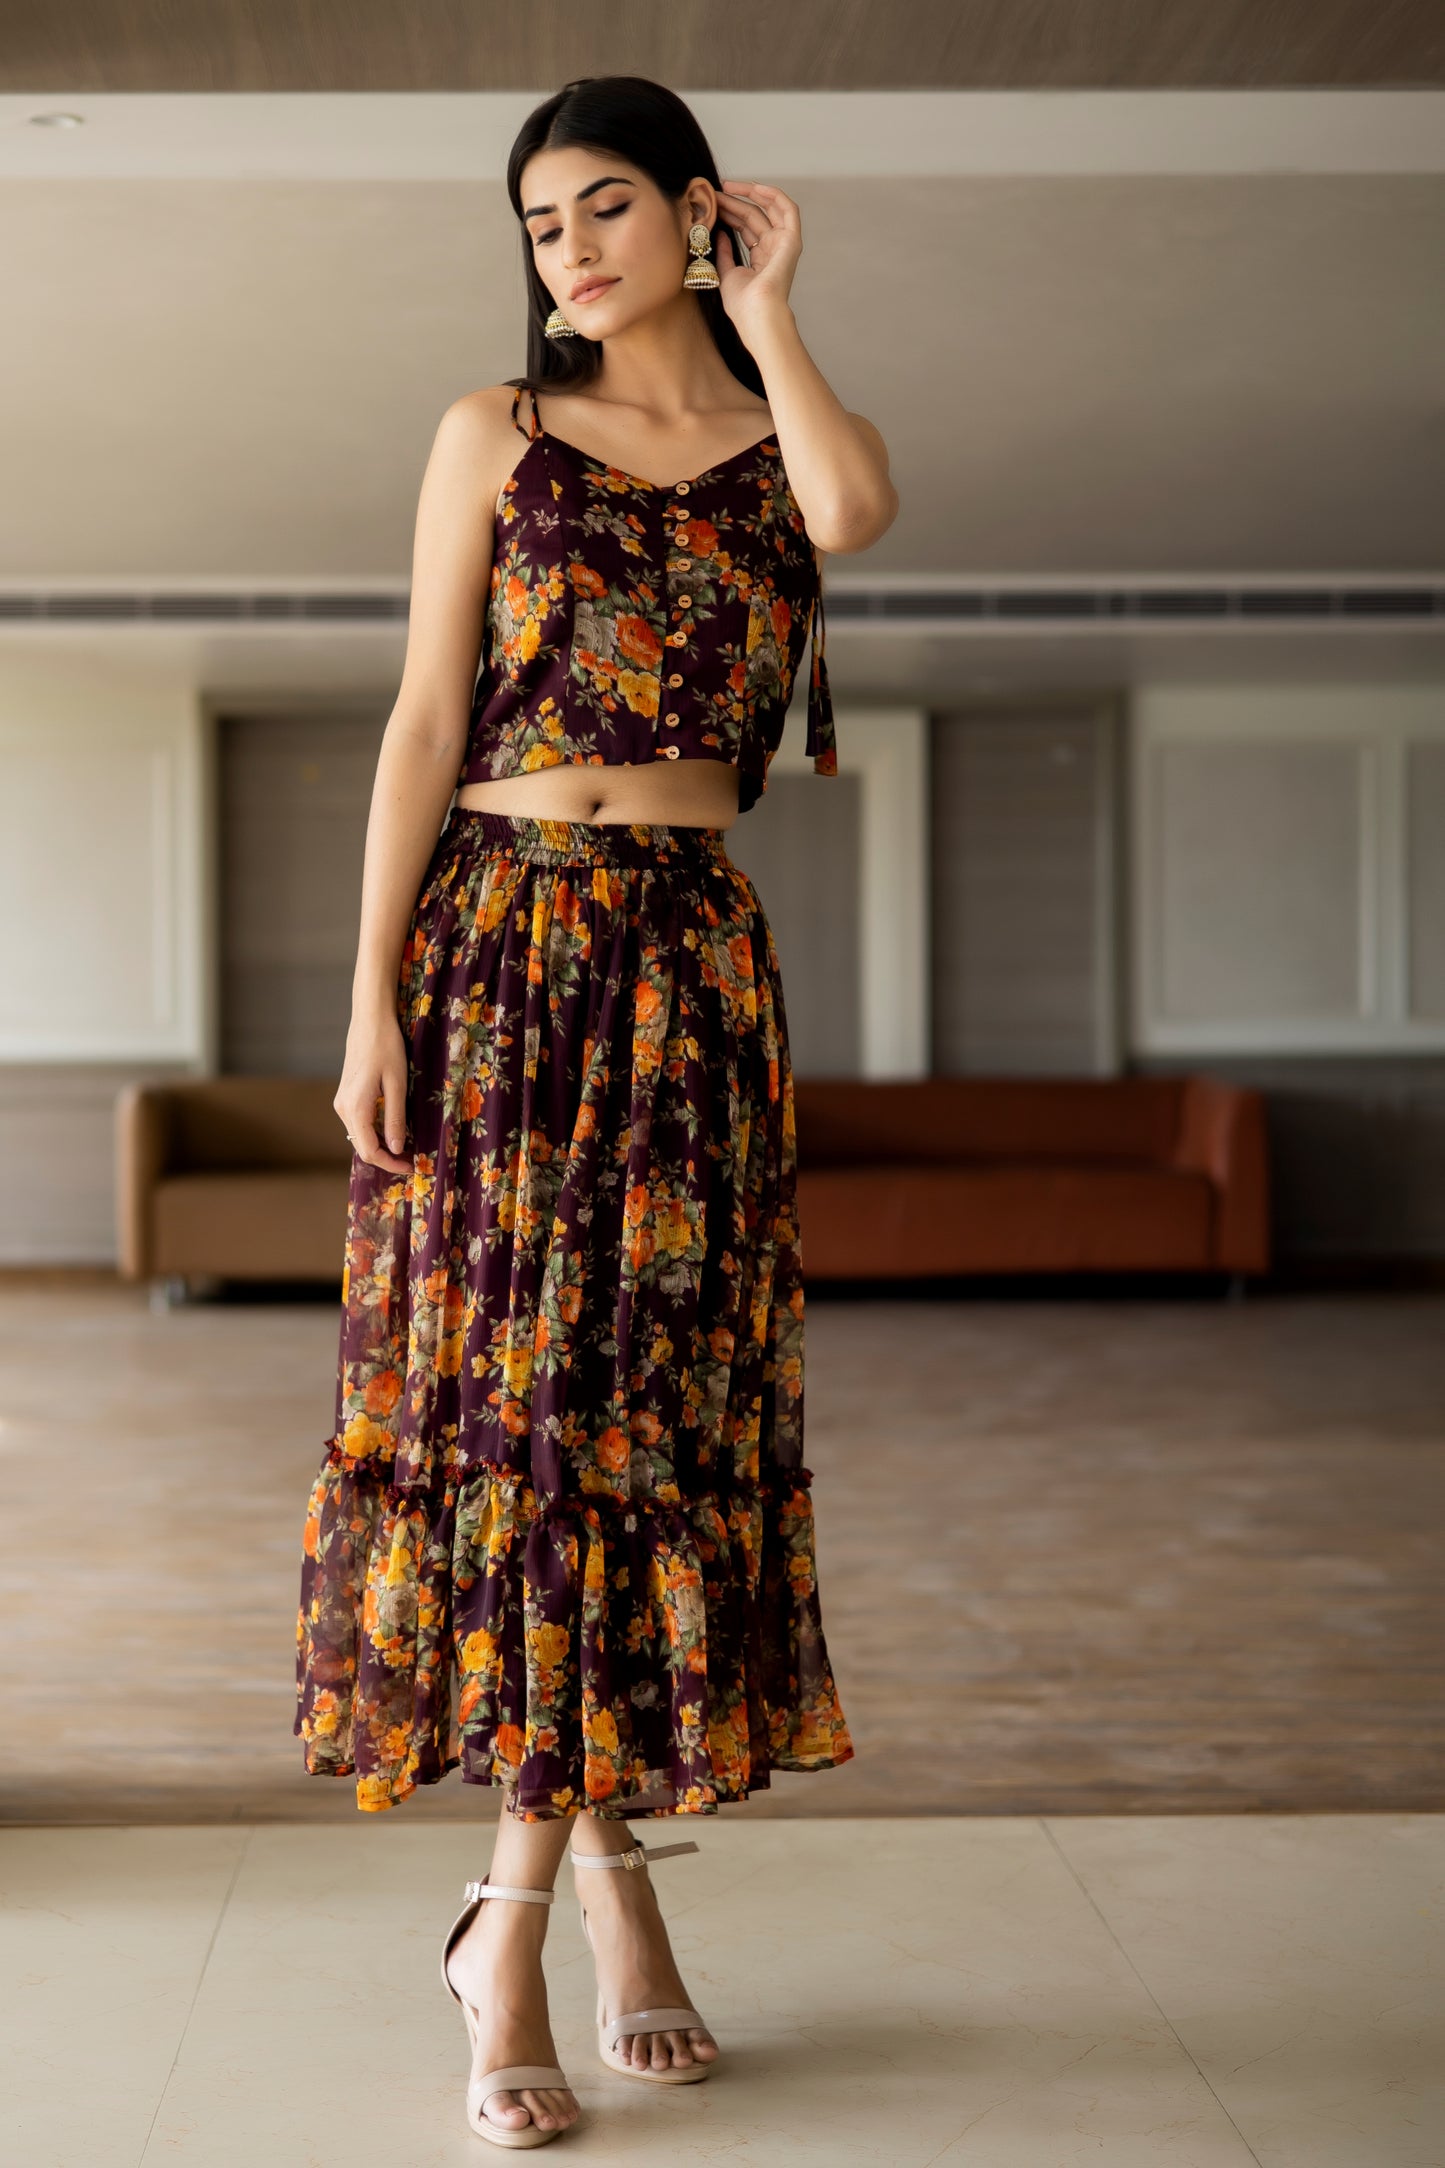 BROWN FLORAL SKIRT TOP CO-ORD SET